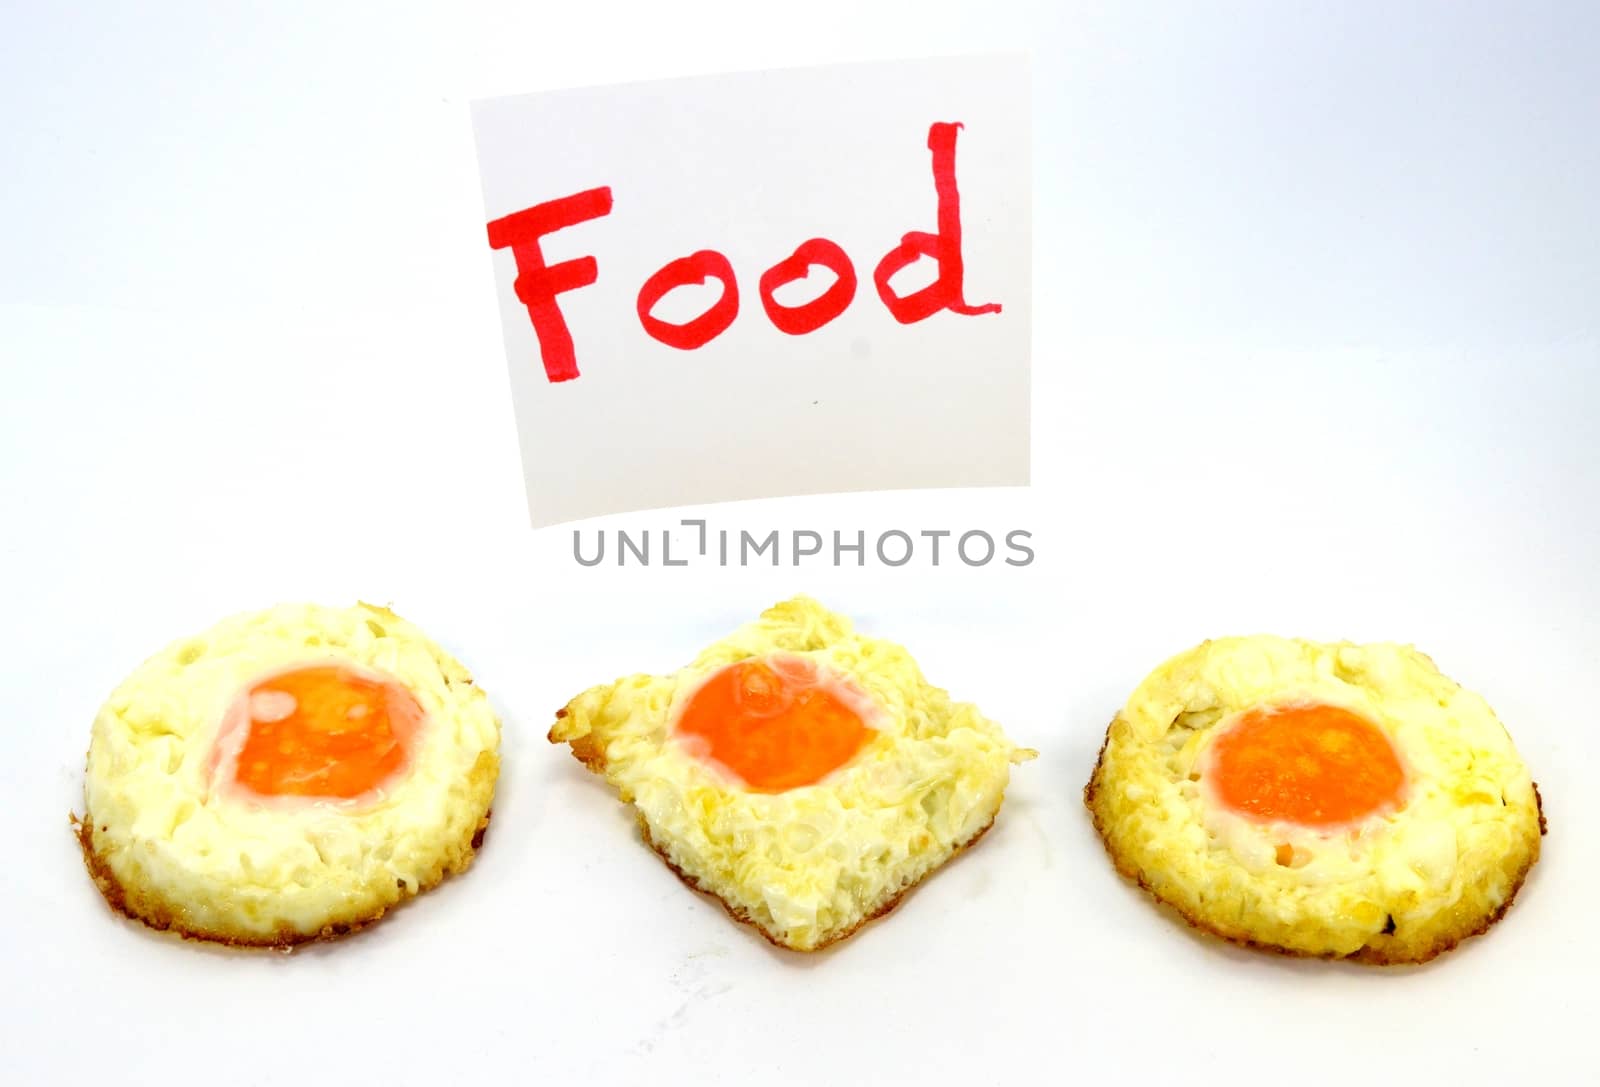 Egg trio on the plate with the food logo on a white background